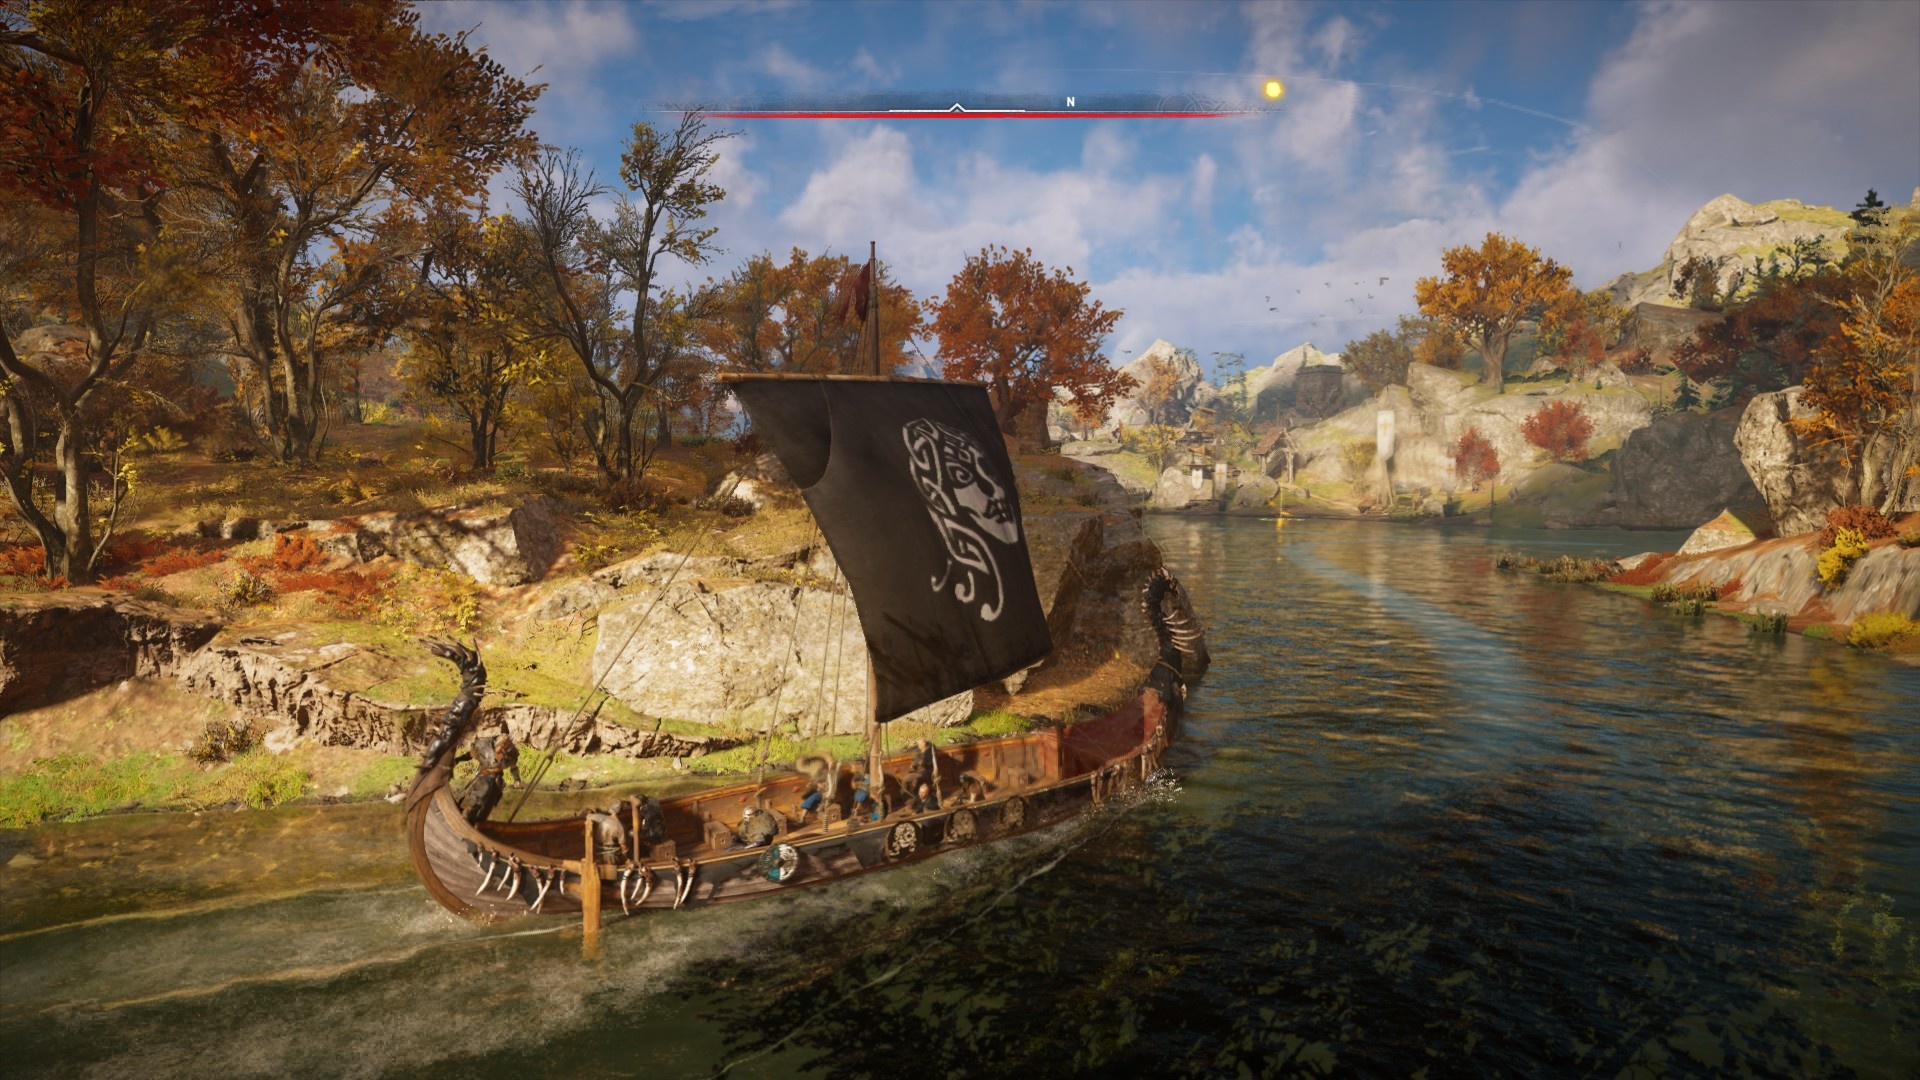 (The river raids put the longship back in the limelight more. The entertaining raids along a total of six rivers are fun and also provide resources that we use to upgrade the ship and construct new buildings such as the armoury and rune forge.)